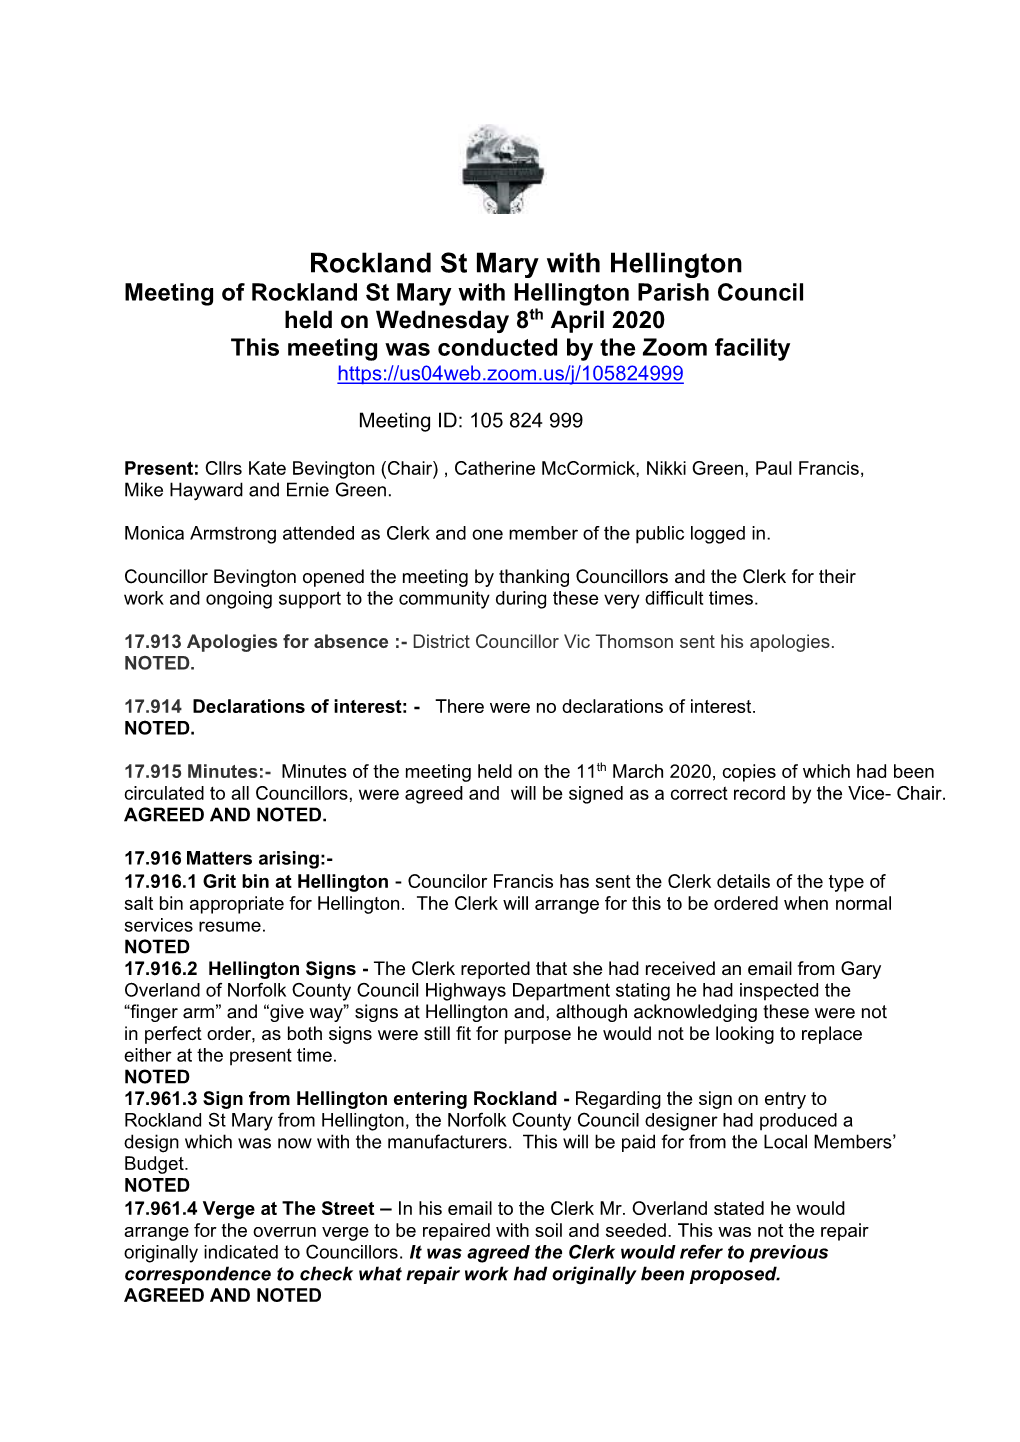 Rockland St Mary with Hellington Parish Council Held on Wednesday 8Th April 2020 This Meeting Was Conducted by the Zoom Facility